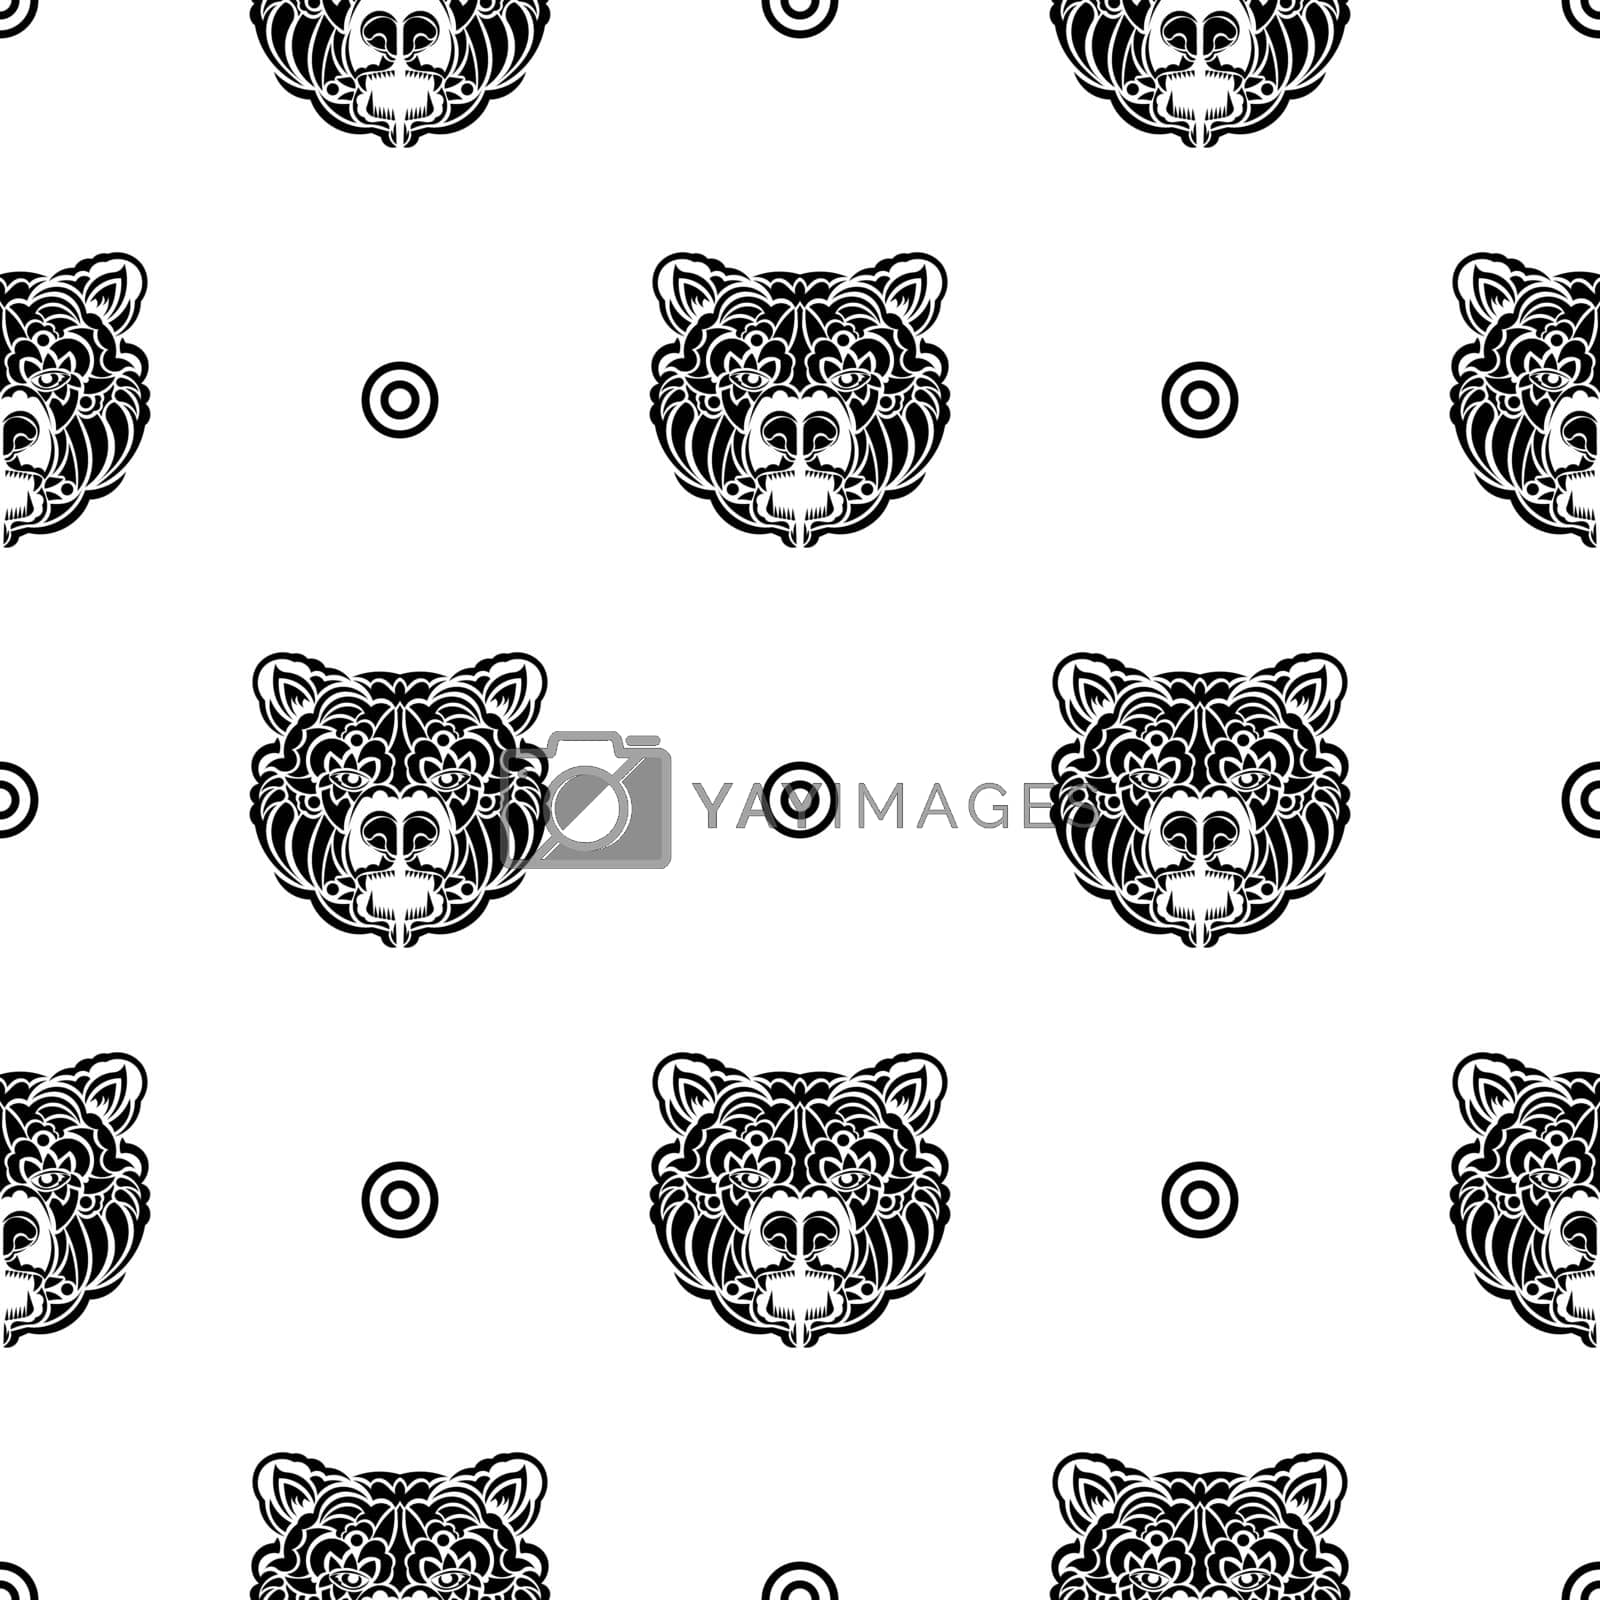 Black-white seamless pattern with bear face. Good for garments, textiles, backgrounds and prints. Vector illustration.